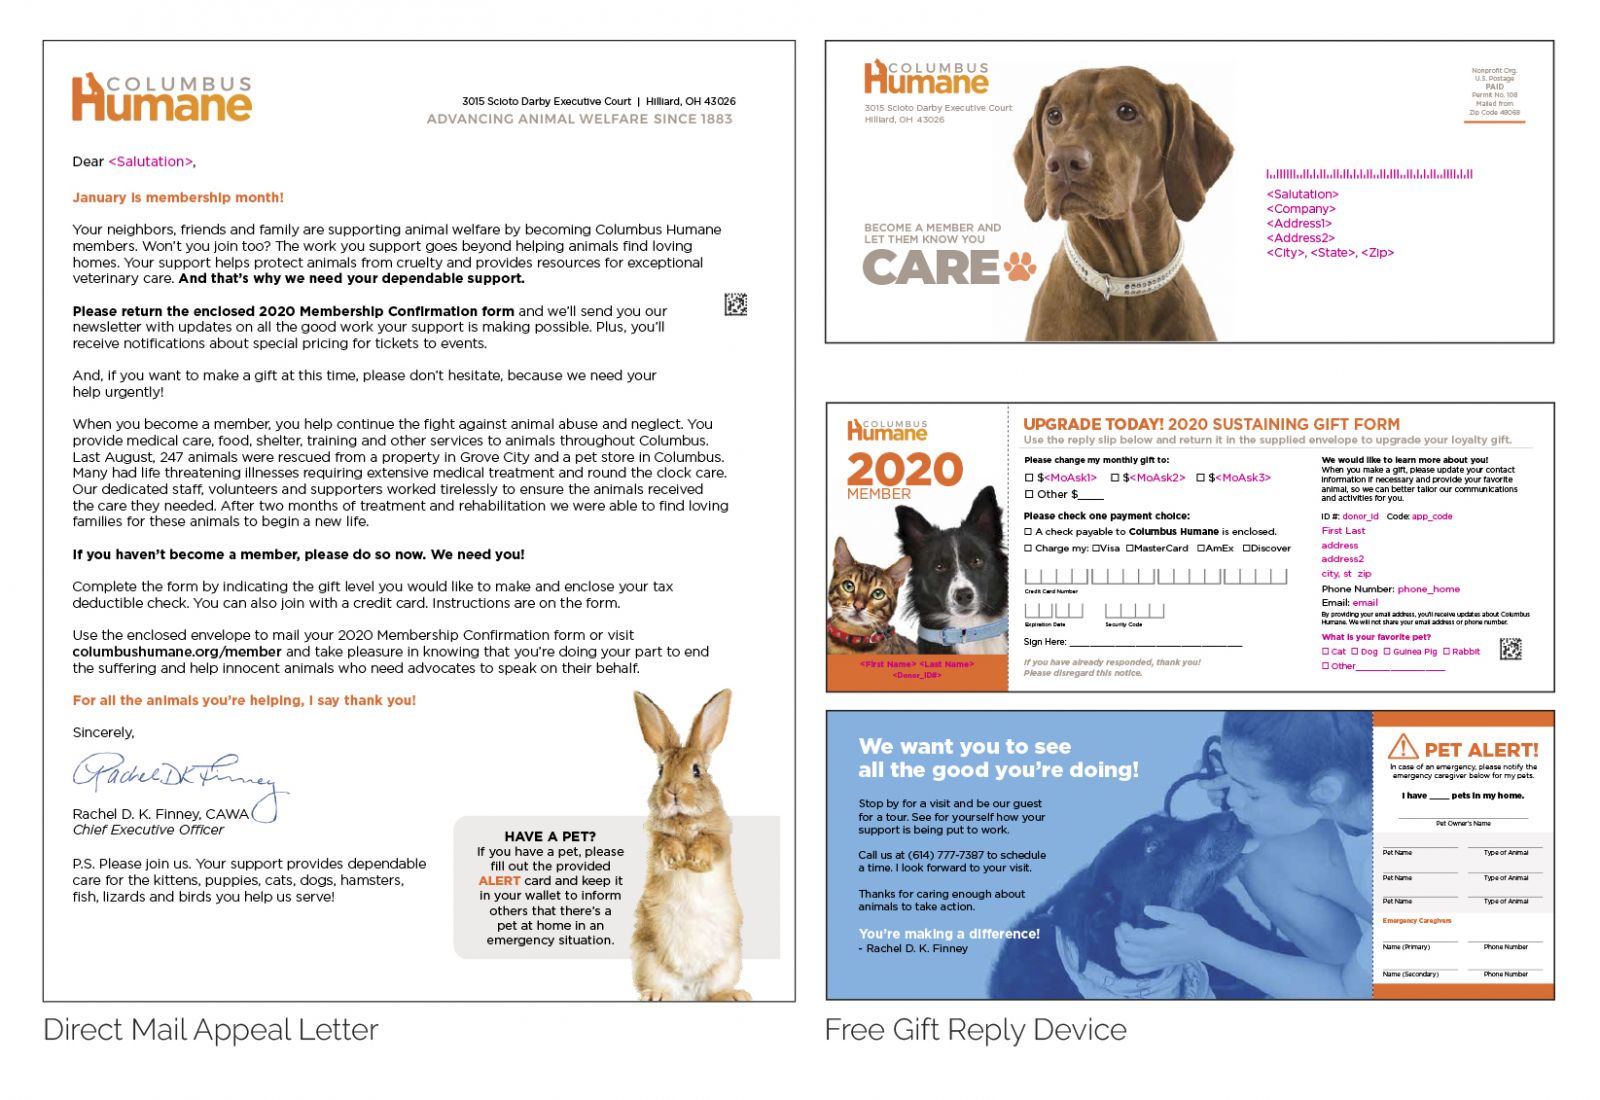 A direct mail appeal letter to raise money for the Columbus Humane animal welfare organization.